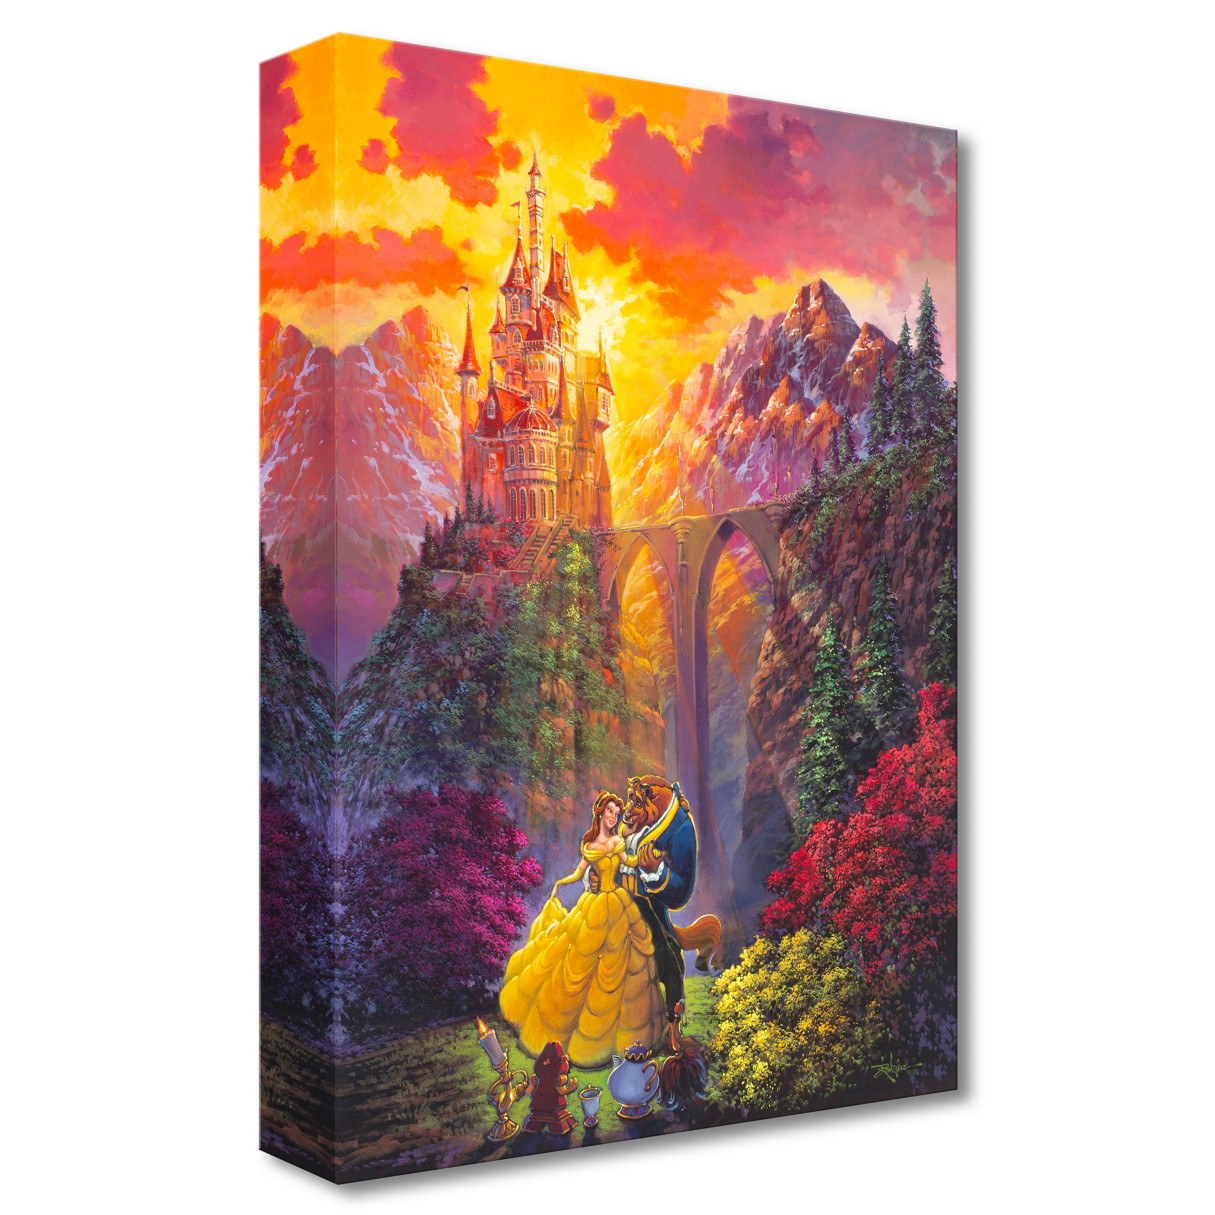 Beauty and the Beast ''Spring Dance'' Giclée on Canvas by Rodel Gonzalez – Limited Edition